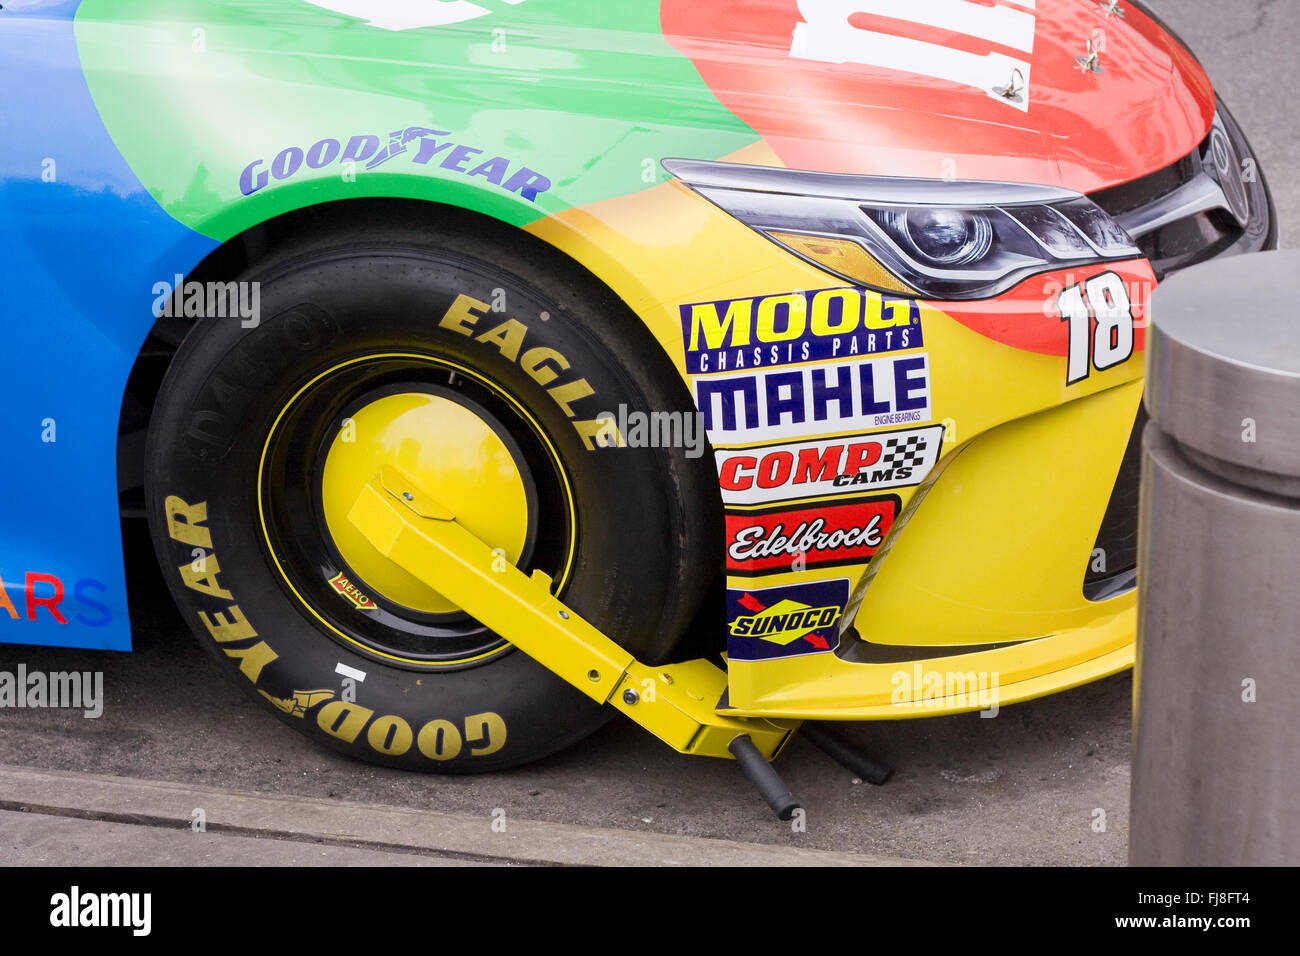 NASCAR Racecar parked on the street with an immobilization boot on the right front Goodyear Eagle D4470 racing tire Stock Photo